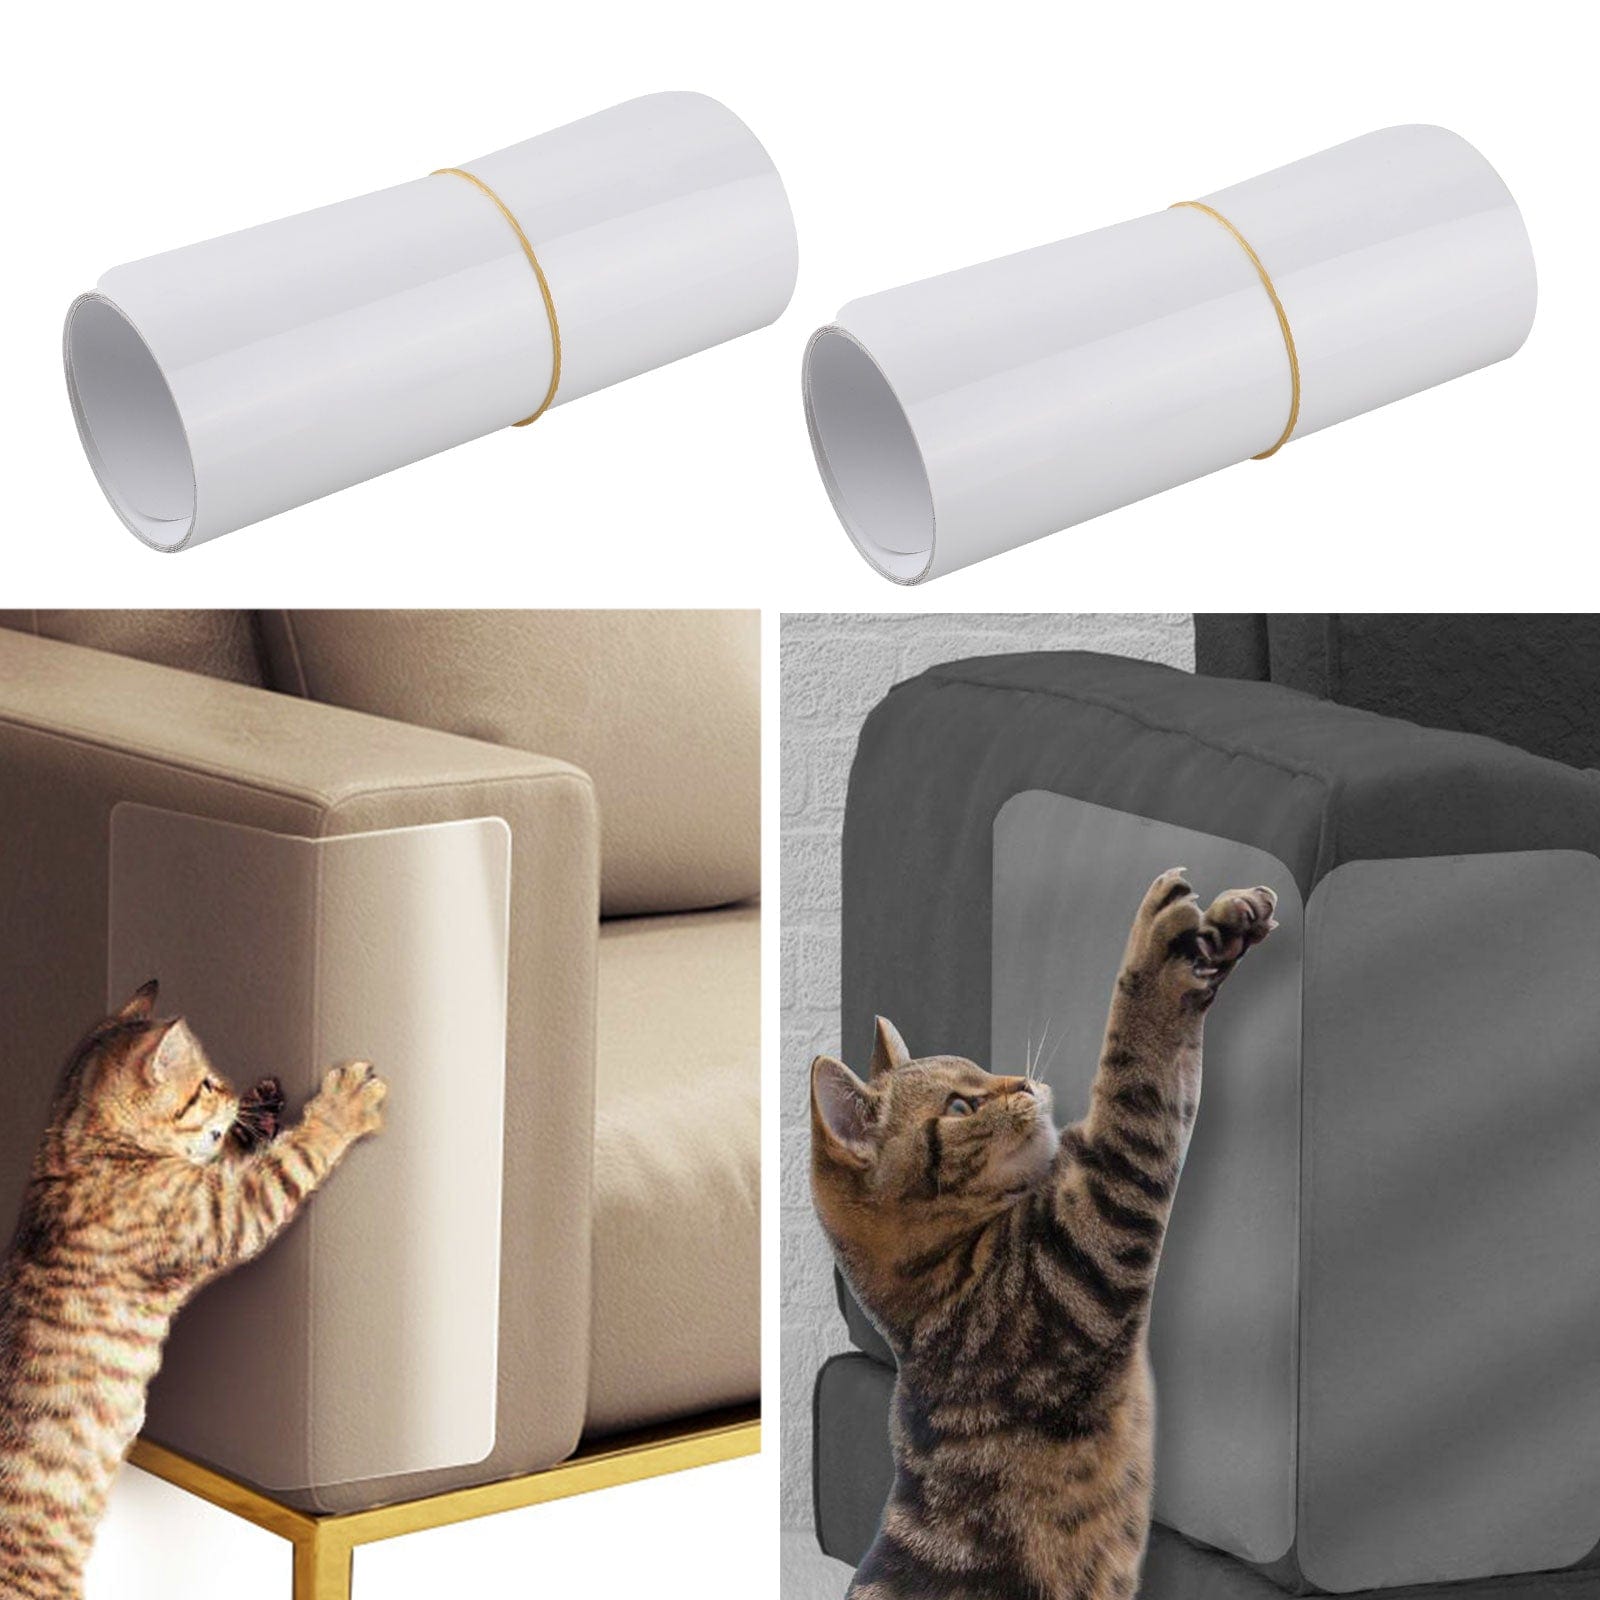 2-Pack Pet Cat Scratch Protector, Furniture & Sofa Shield for Dog & Cat Scratching Deterrent, Defender & Repellent Super Sticky Self-Adhesive Backing Animals & Pet Supplies > Pet Supplies > Cat Supplies > Cat Furniture EEEkit   